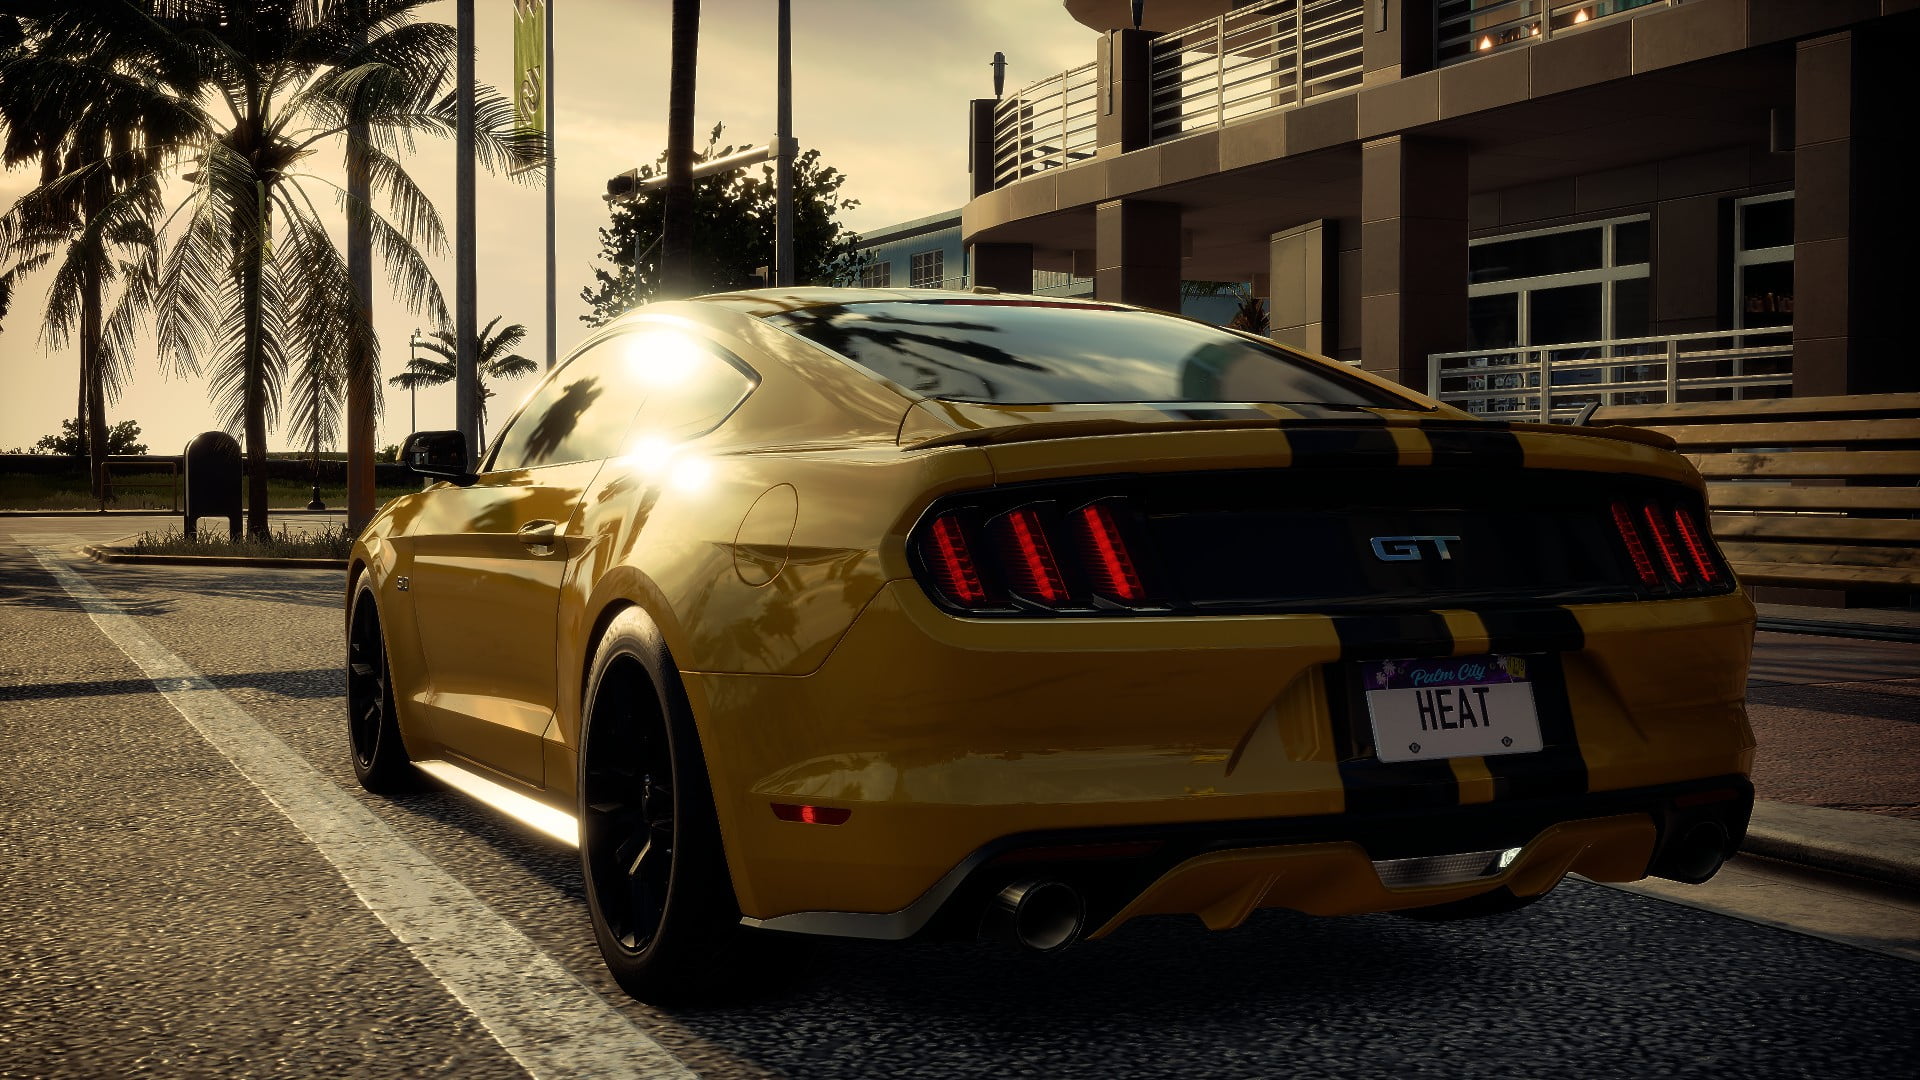 Ford Mustang, muscle cars, Need for Speed: Heat, 4K, street view